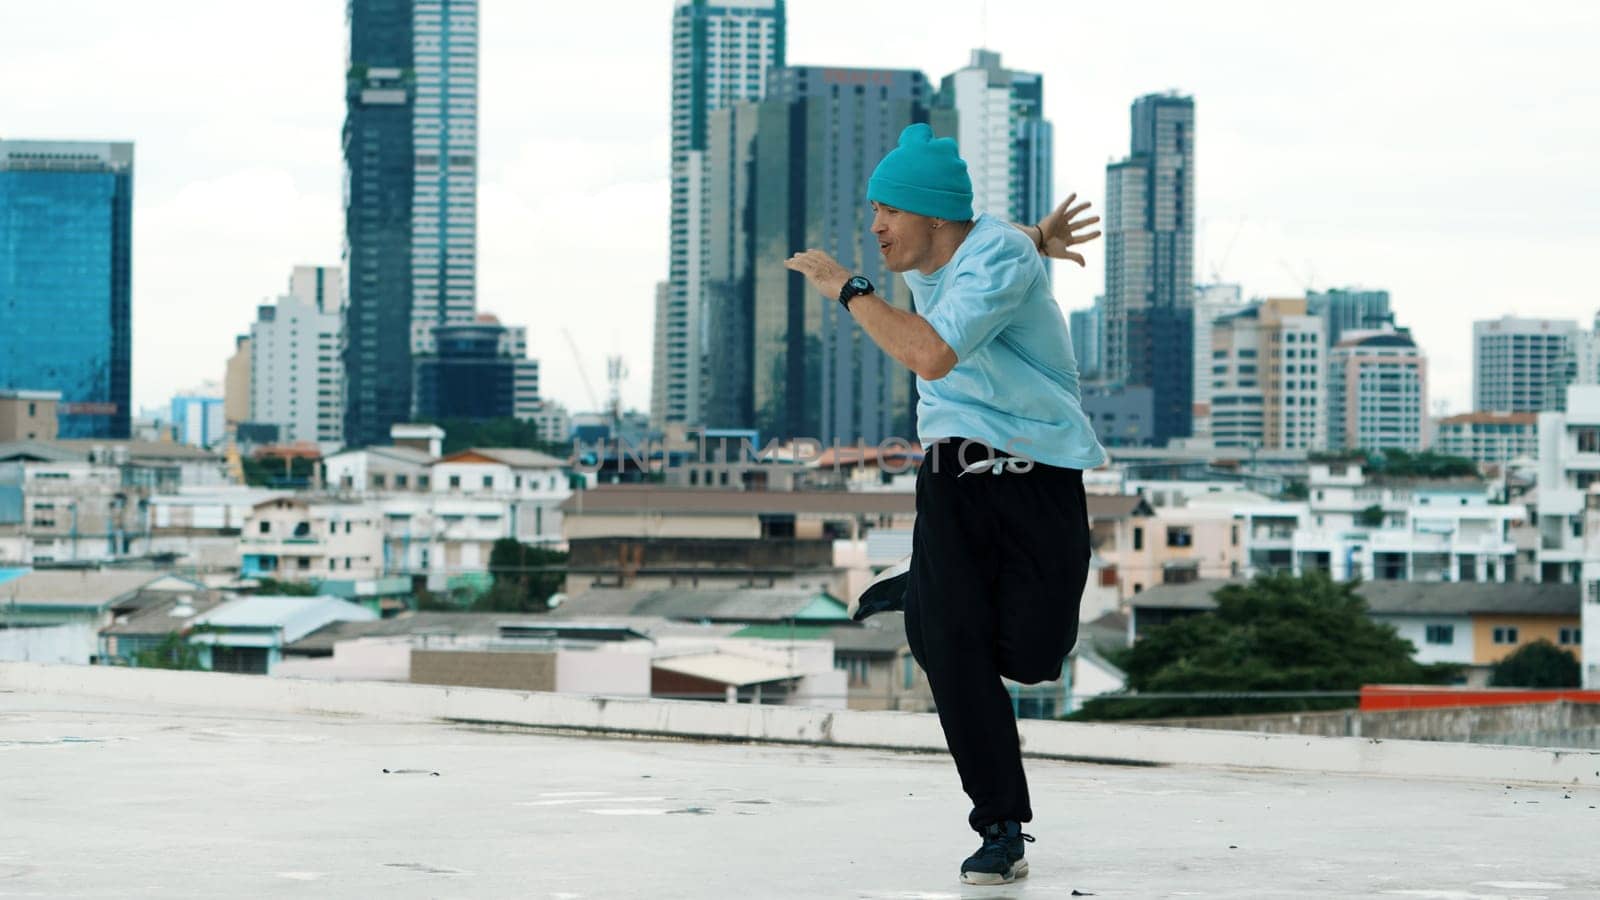 Skilled caucasian B-boy dancer practicing street dancing at rooftop. Endeavor. by biancoblue